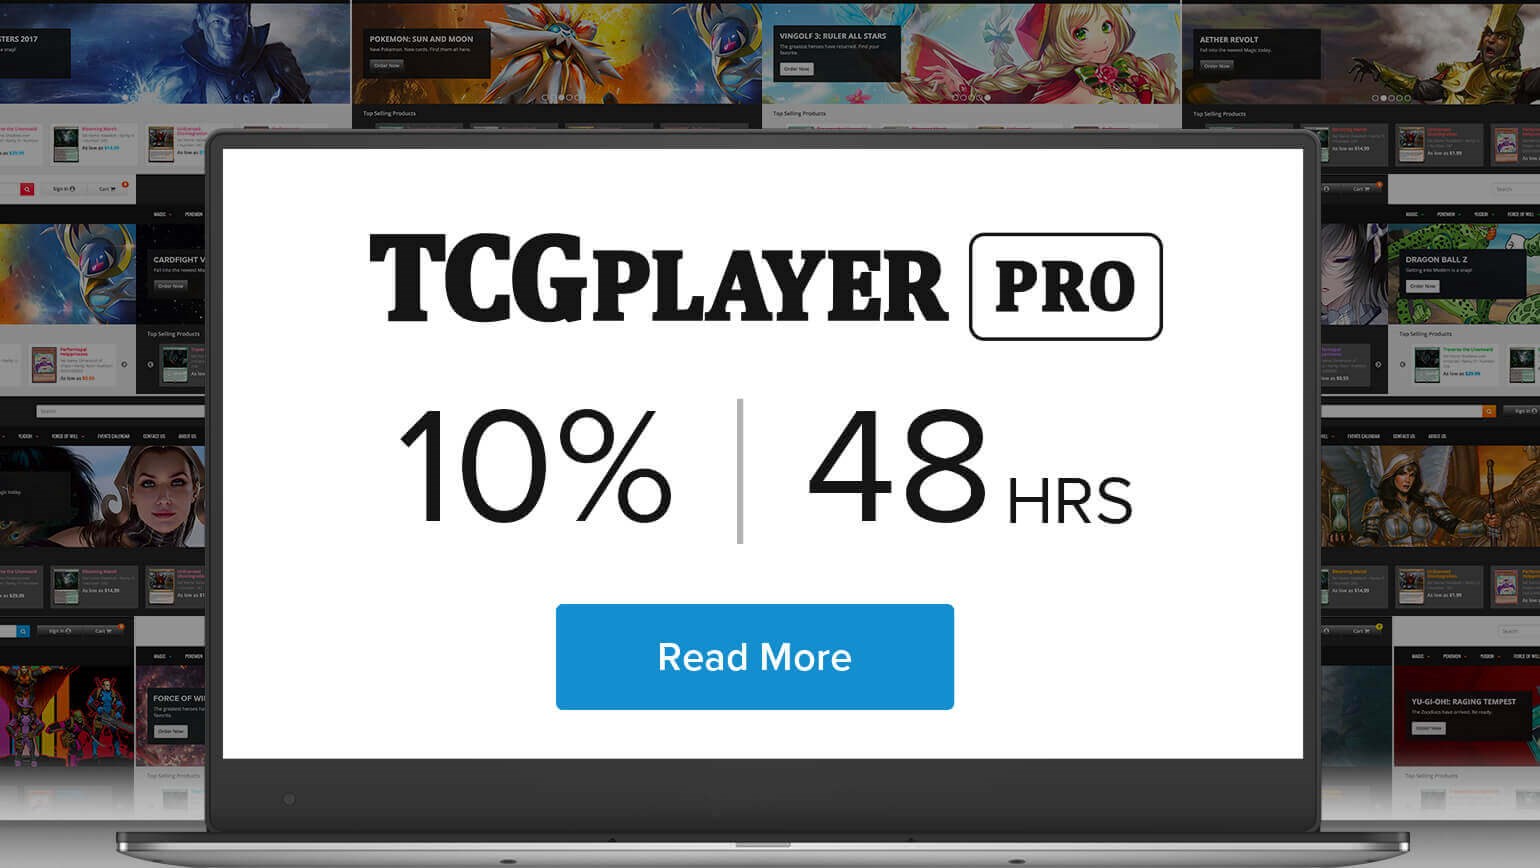 10% of Game Stores Join TCGplayer Pro